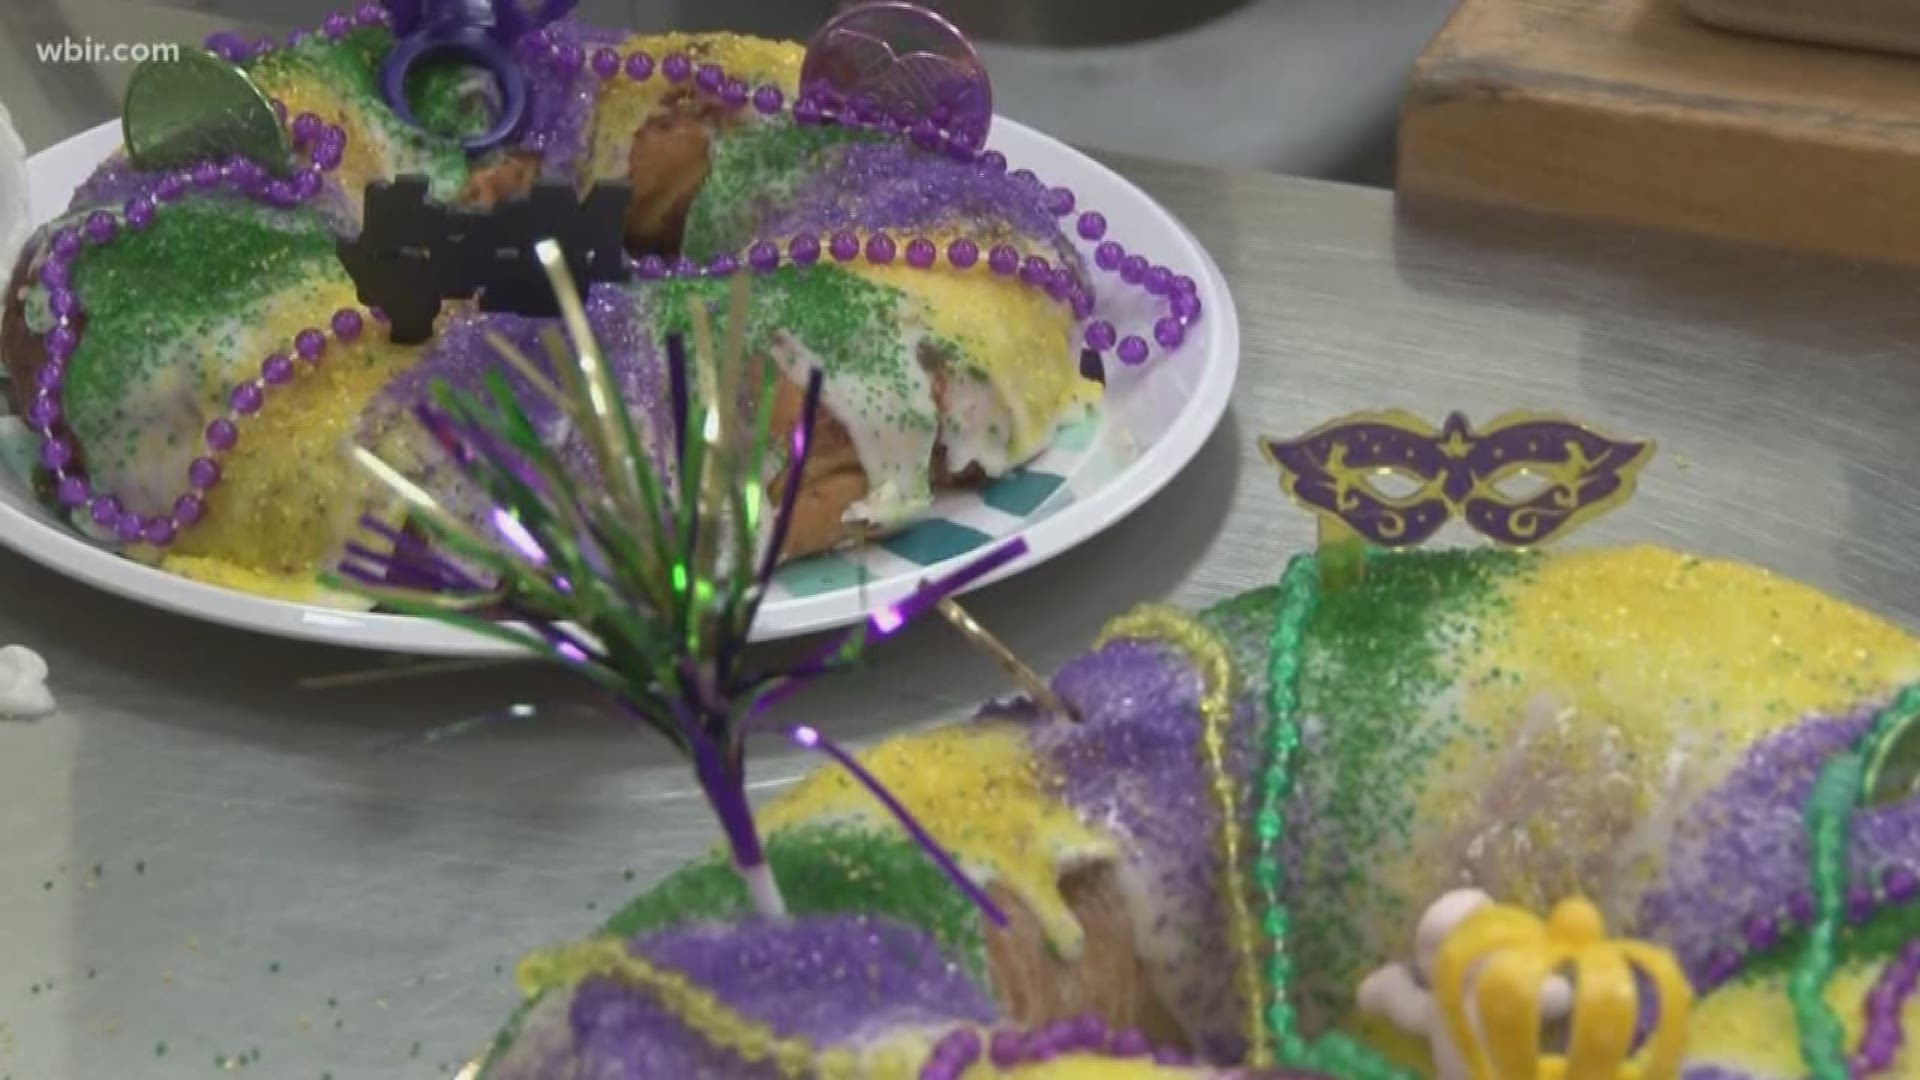 Mardi Gras season is underway. You can get a taste of Mardi Gras with King Cakes. Jan 16, 2018-4pm